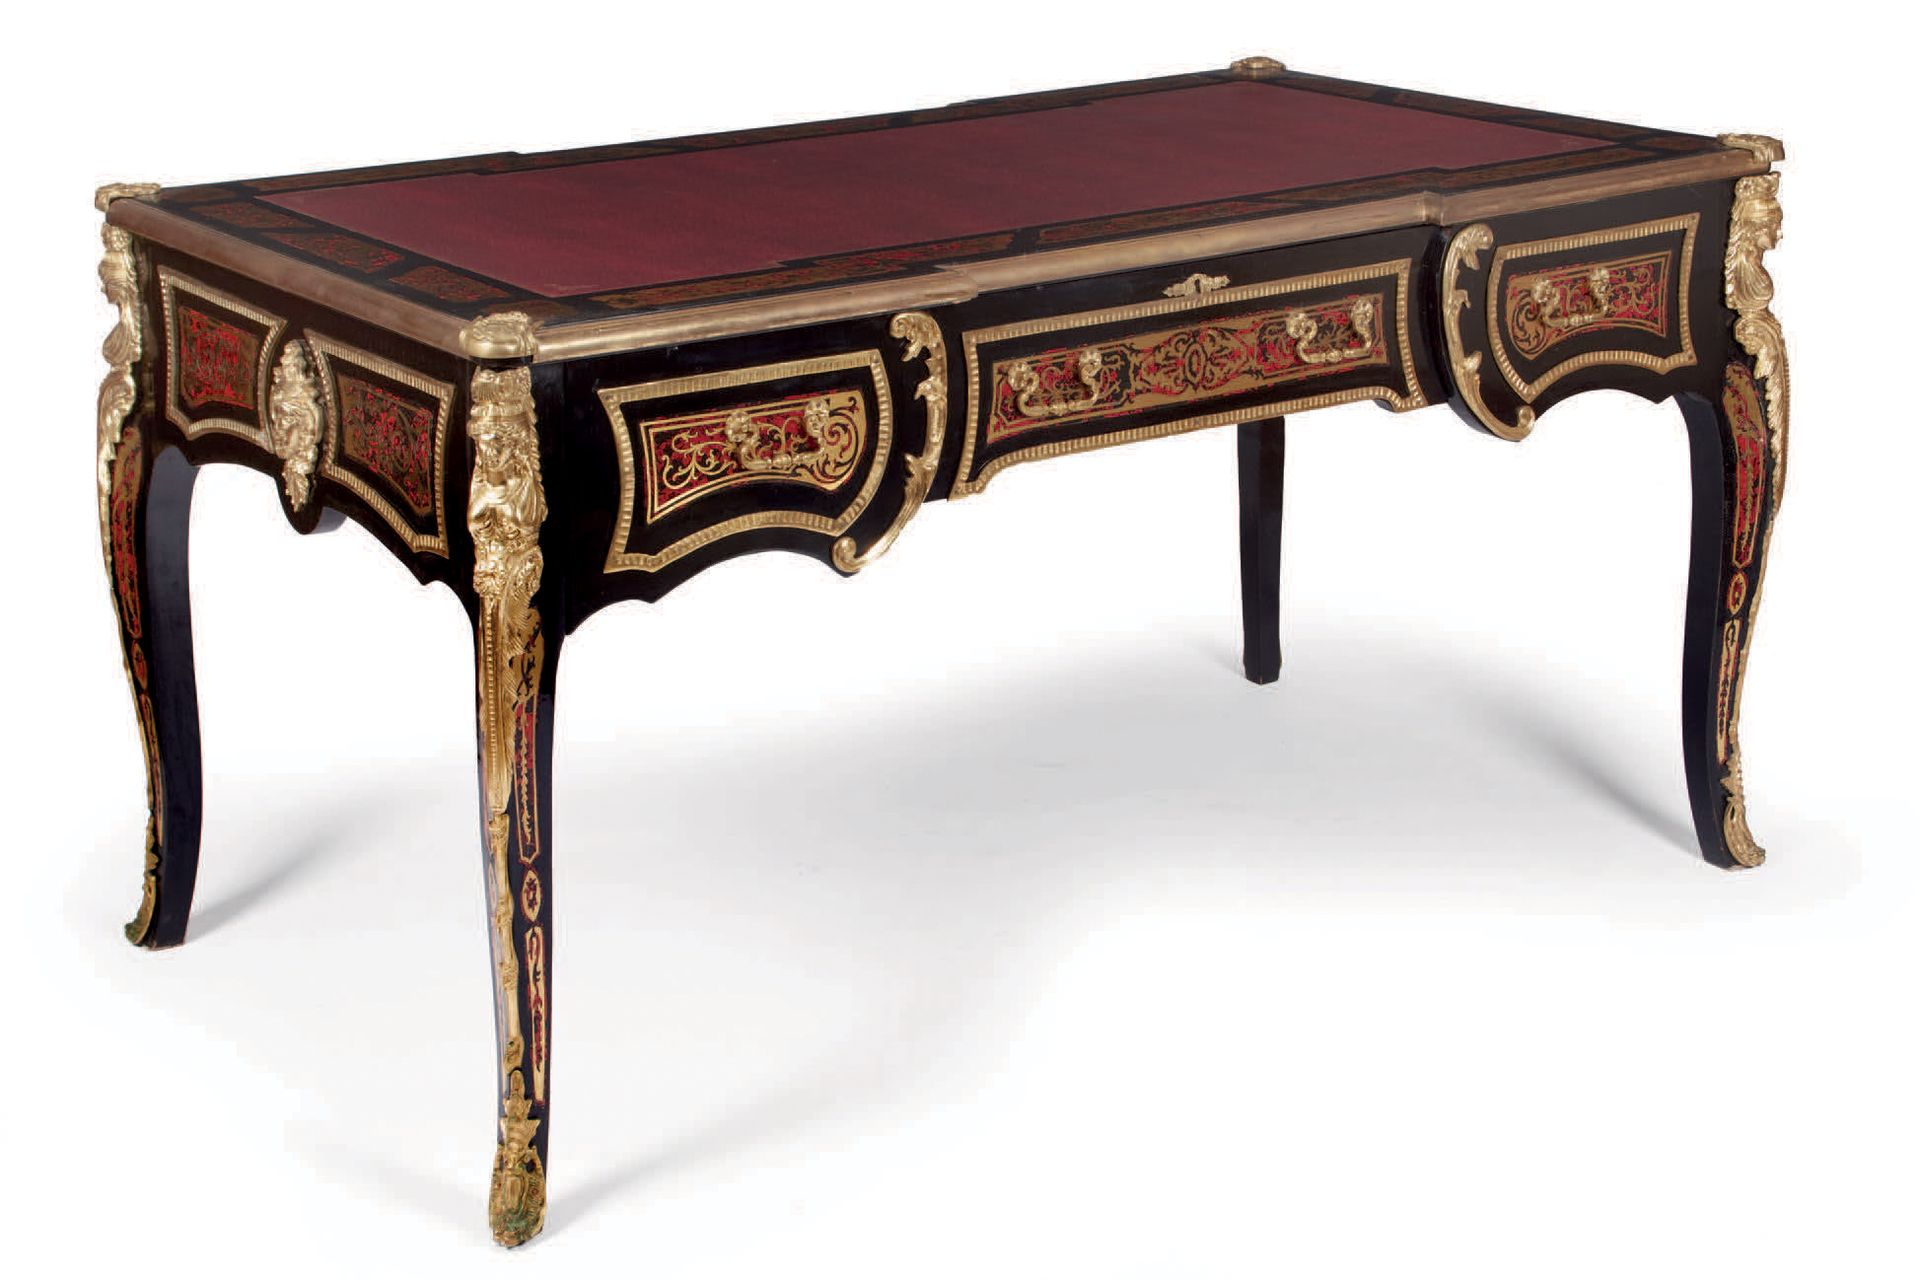 Null Lot consisting of a desk in Boulle style with gilt metal inlays and applica&hellip;